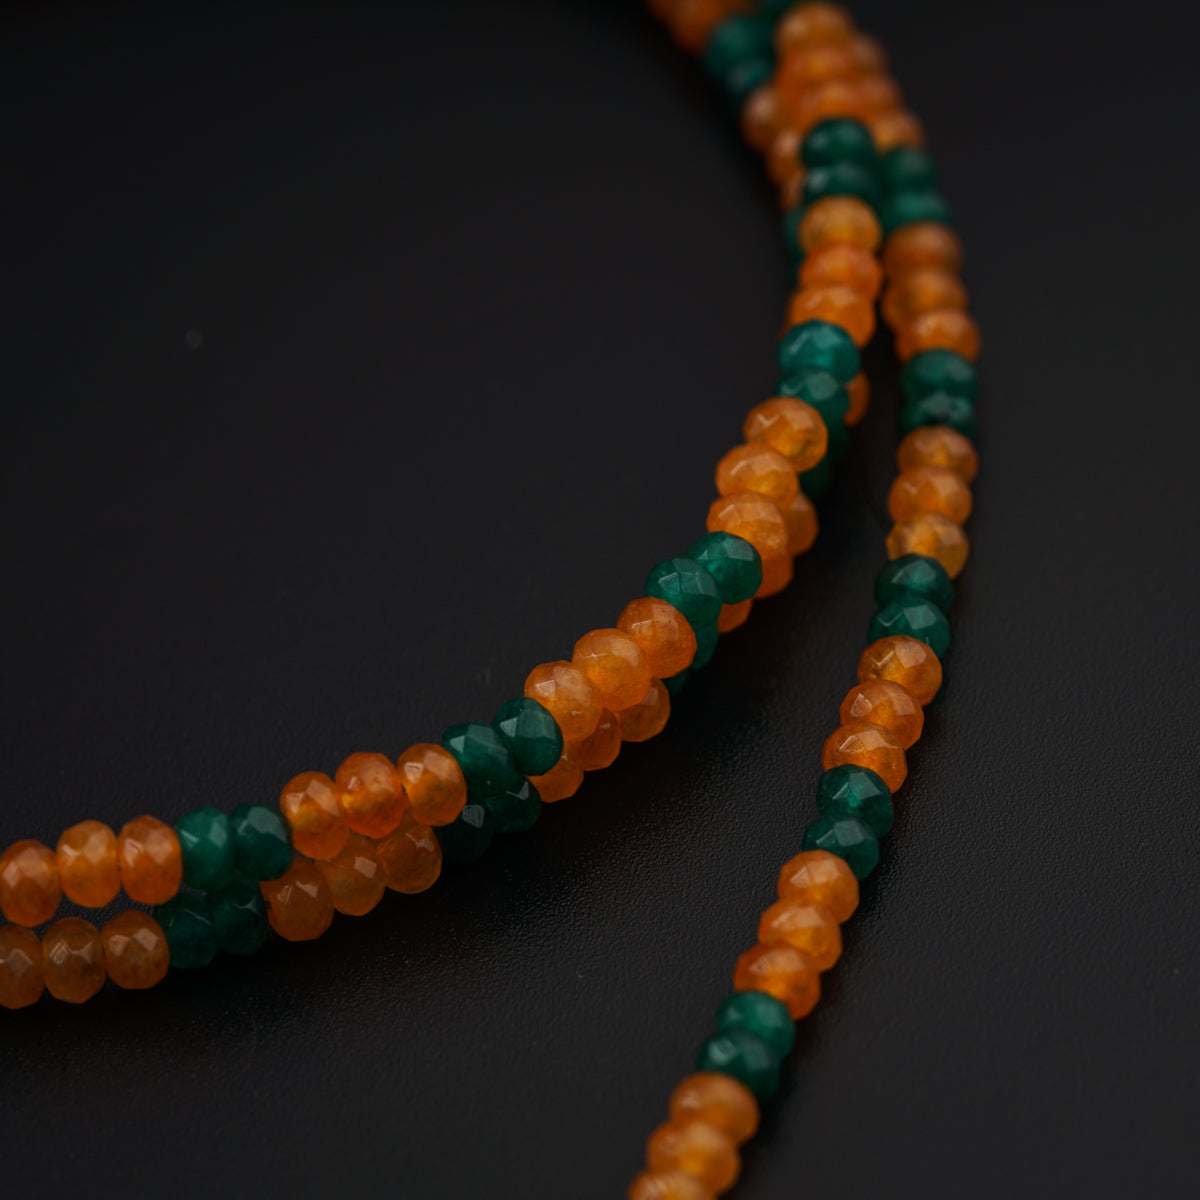 a close up of a necklace with beads